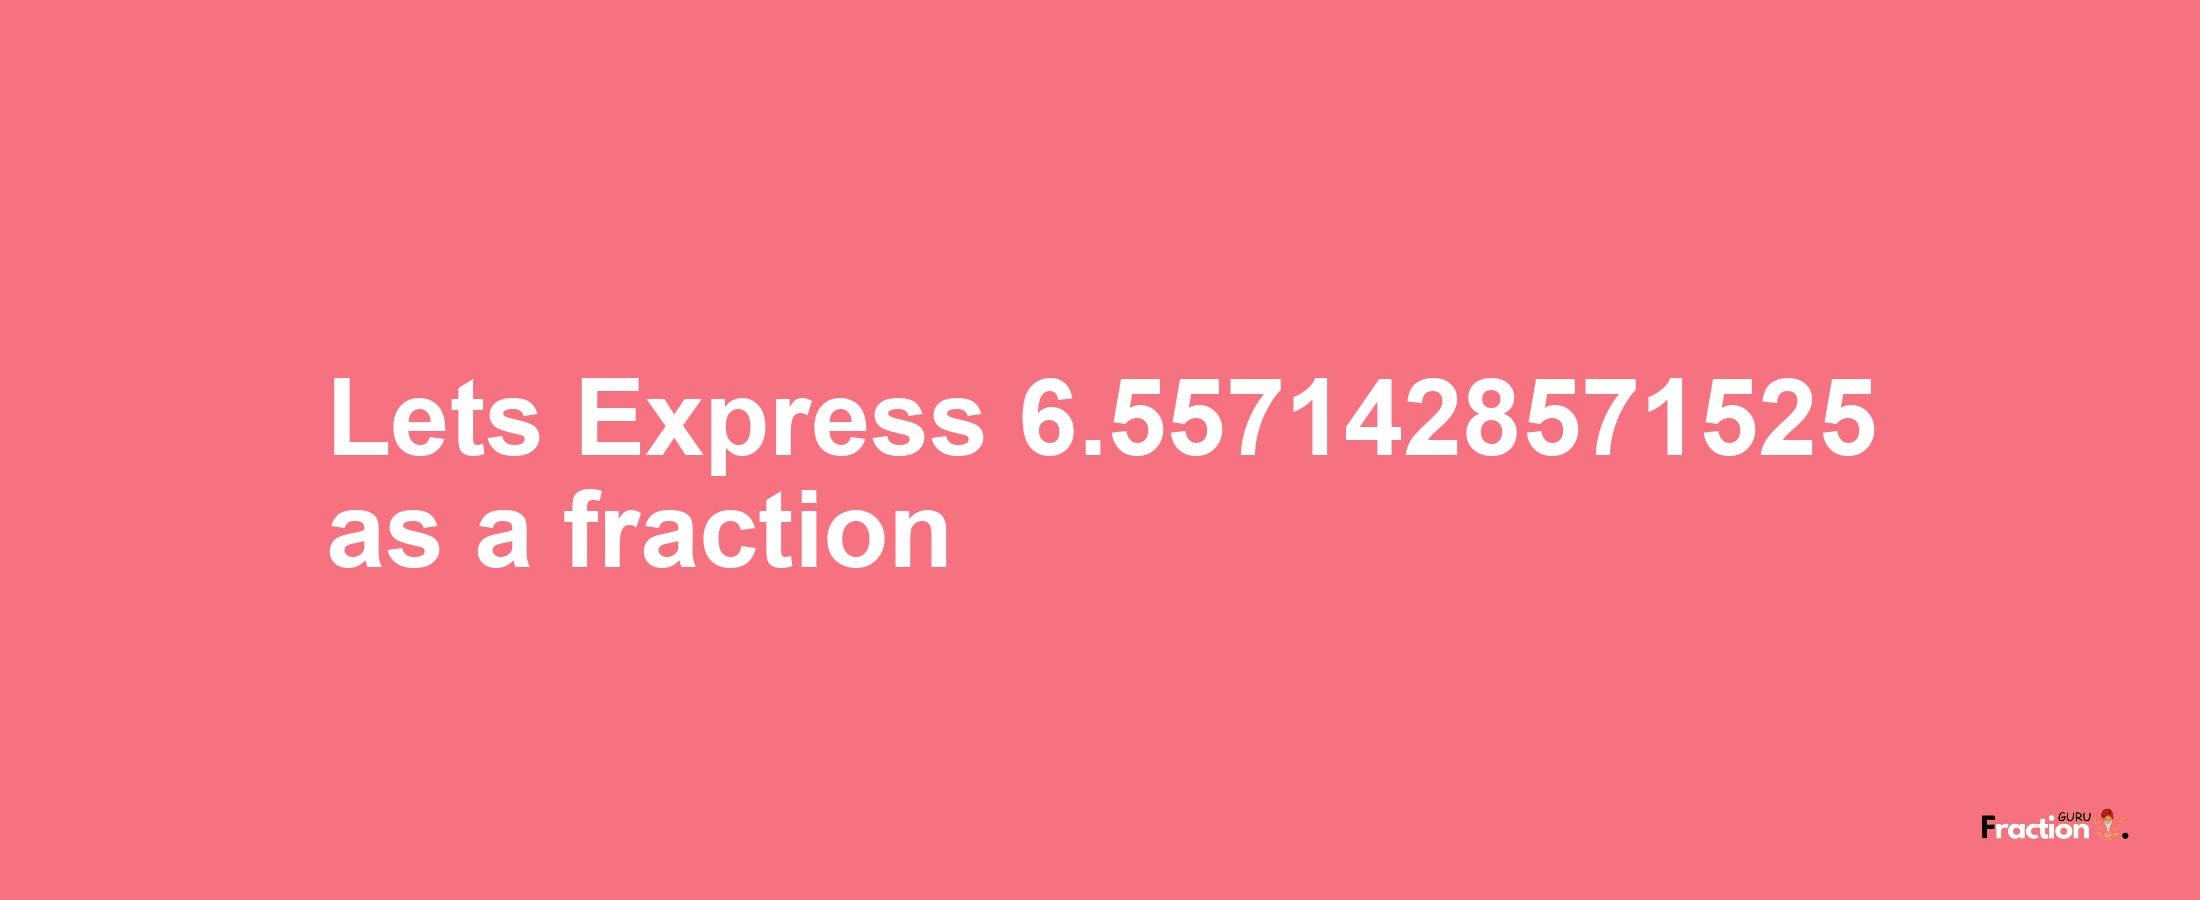 Lets Express 6.5571428571525 as afraction